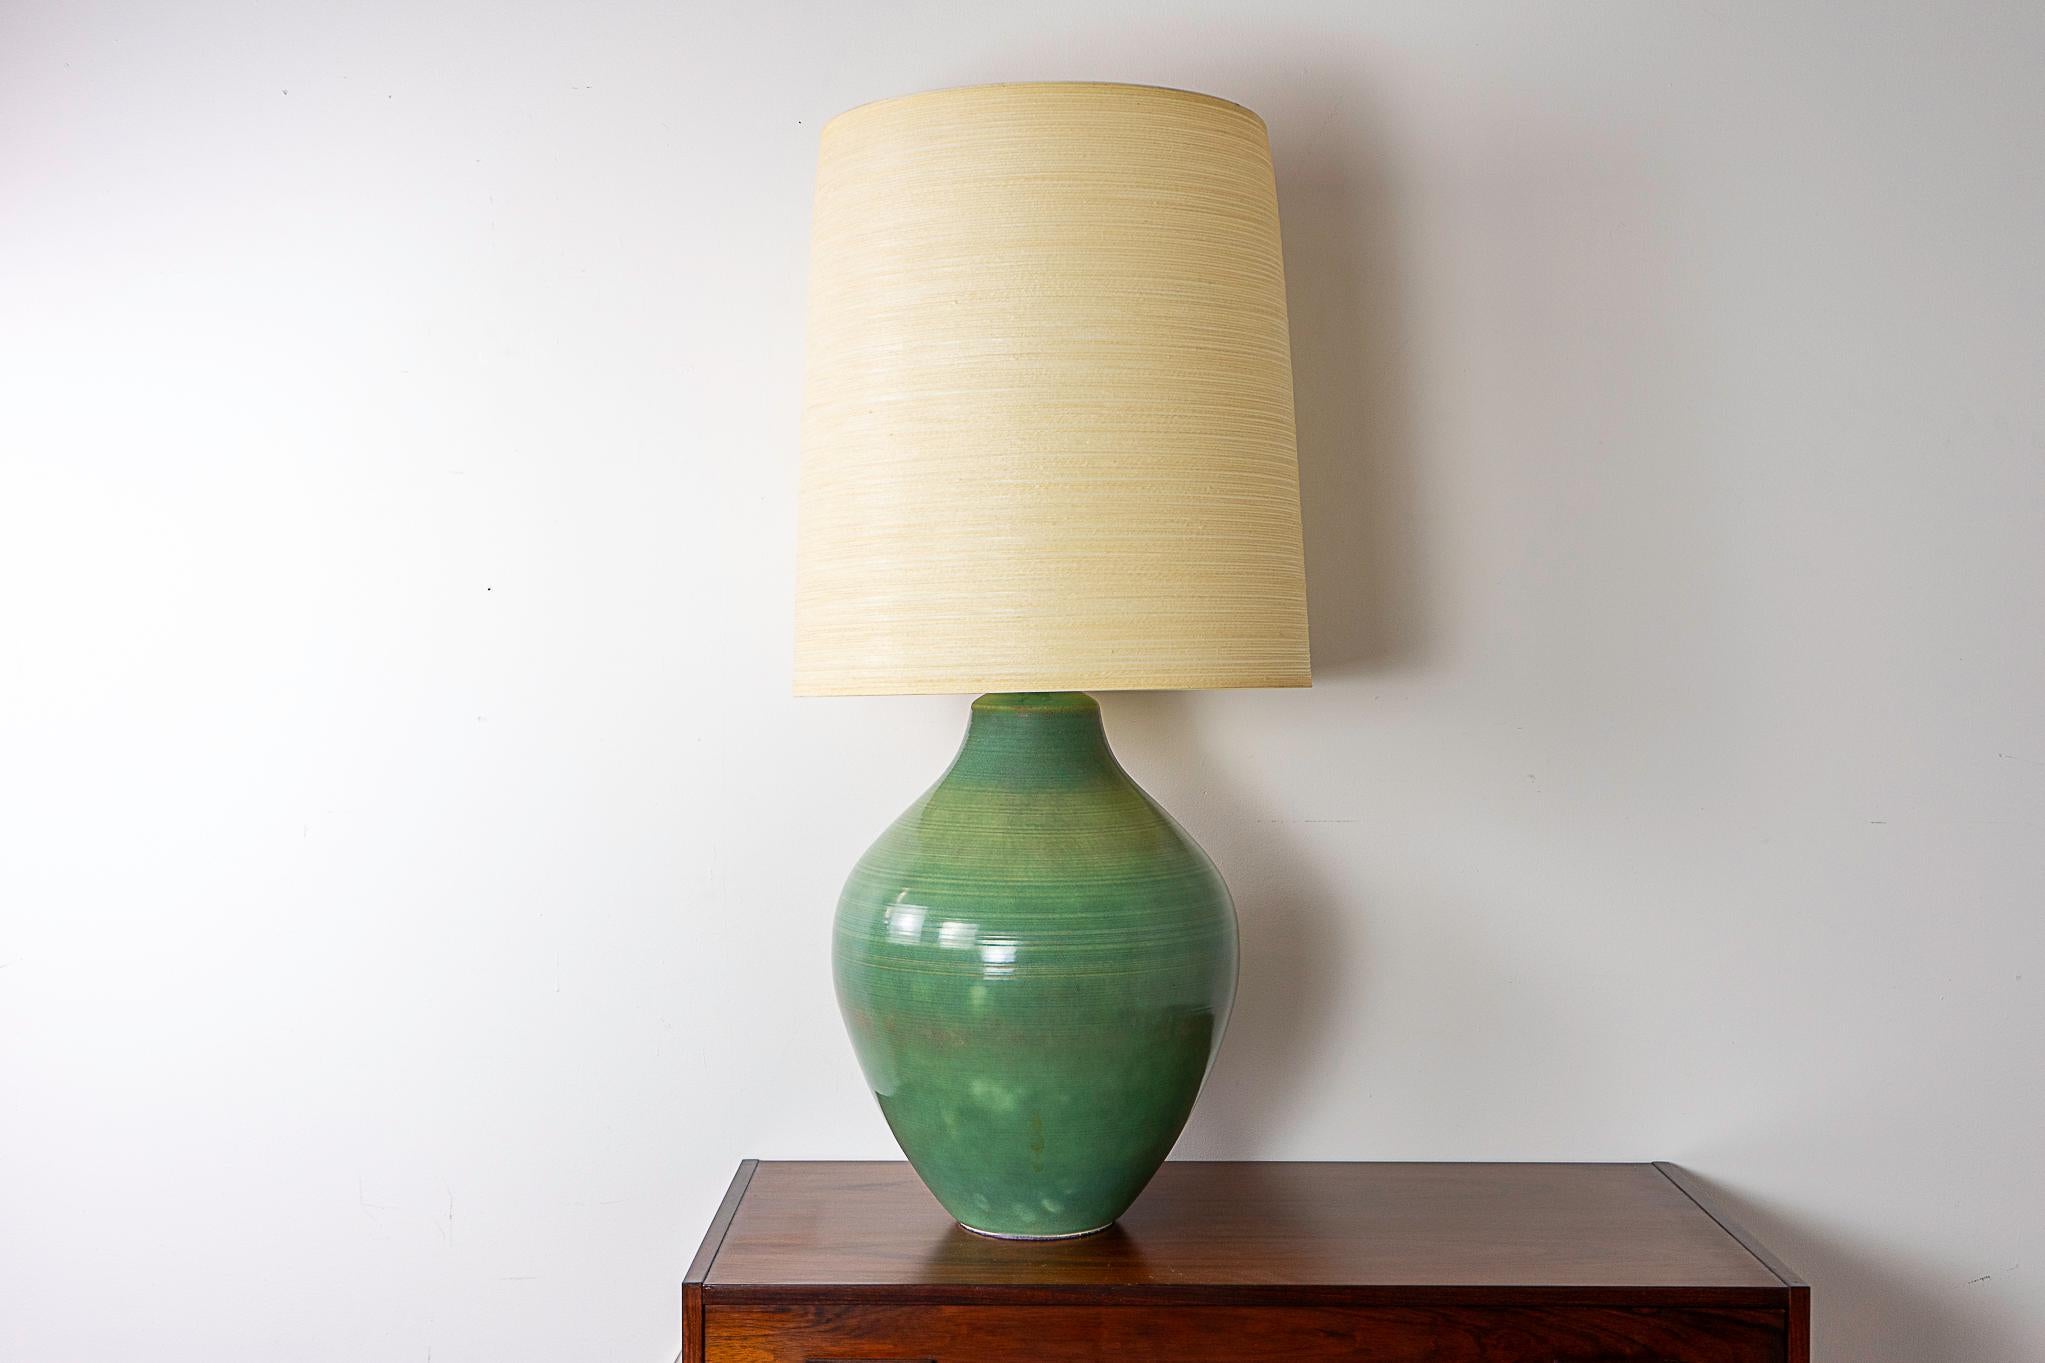 Ceramic table lamp by Lotte & Gunnar Bostlund, circa 1960's. Rare, striking hand thrown ceramic base with a dramatic profile and beautiful celadon glaze! Let the warm glow of their famous lampshades entice you. Excess cord slack can be neatly tucked